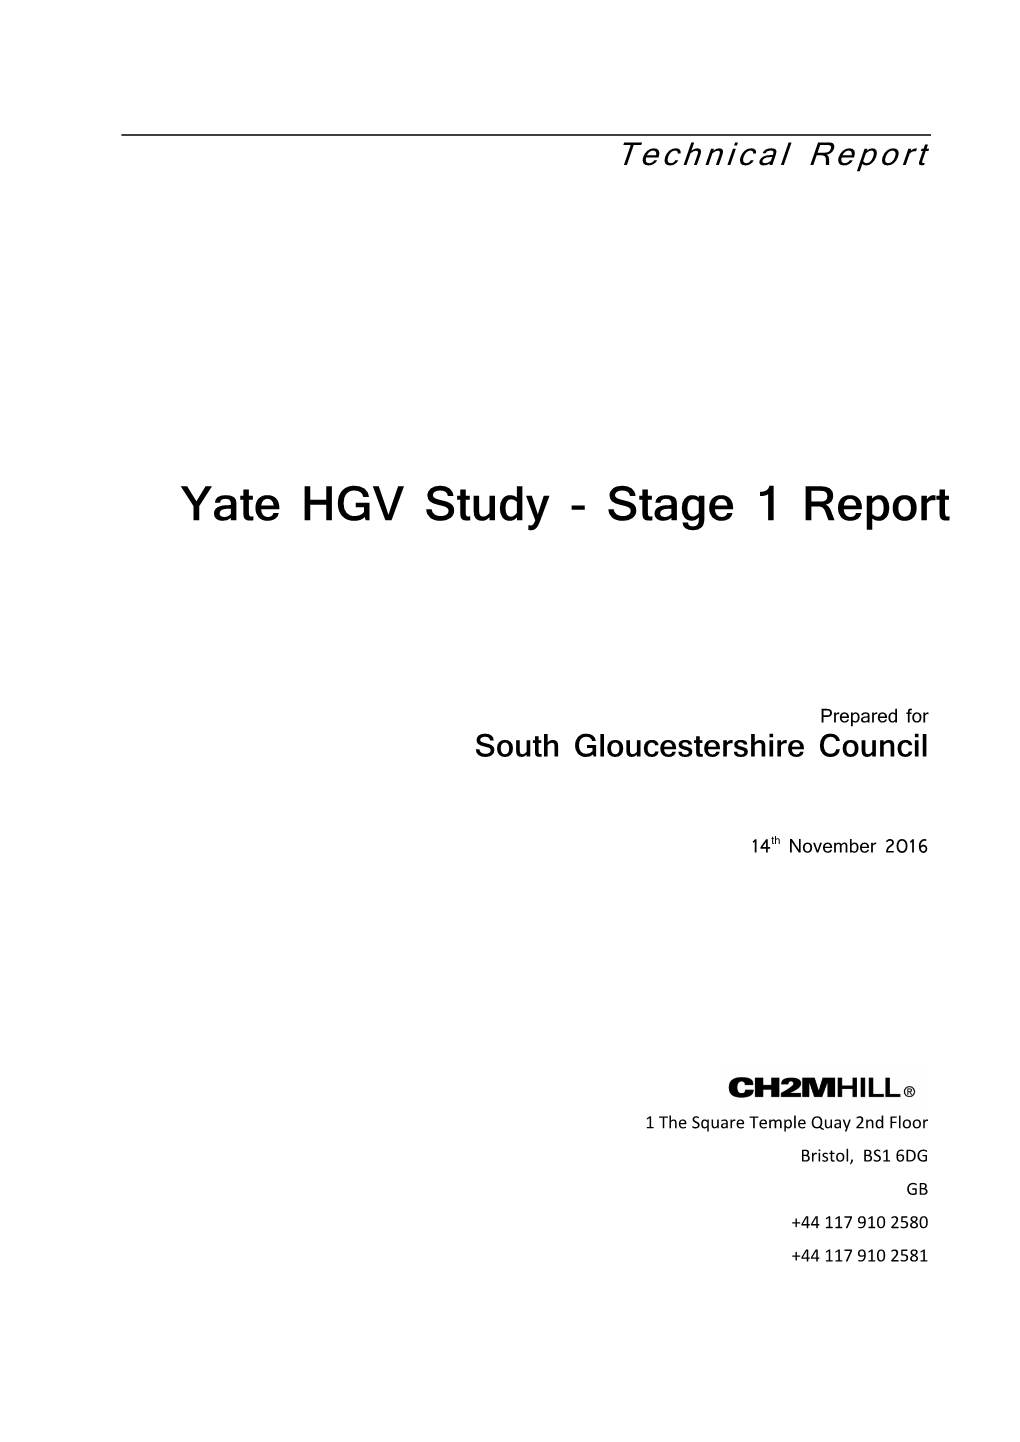 Yate HGV Study - Stage 1 Report